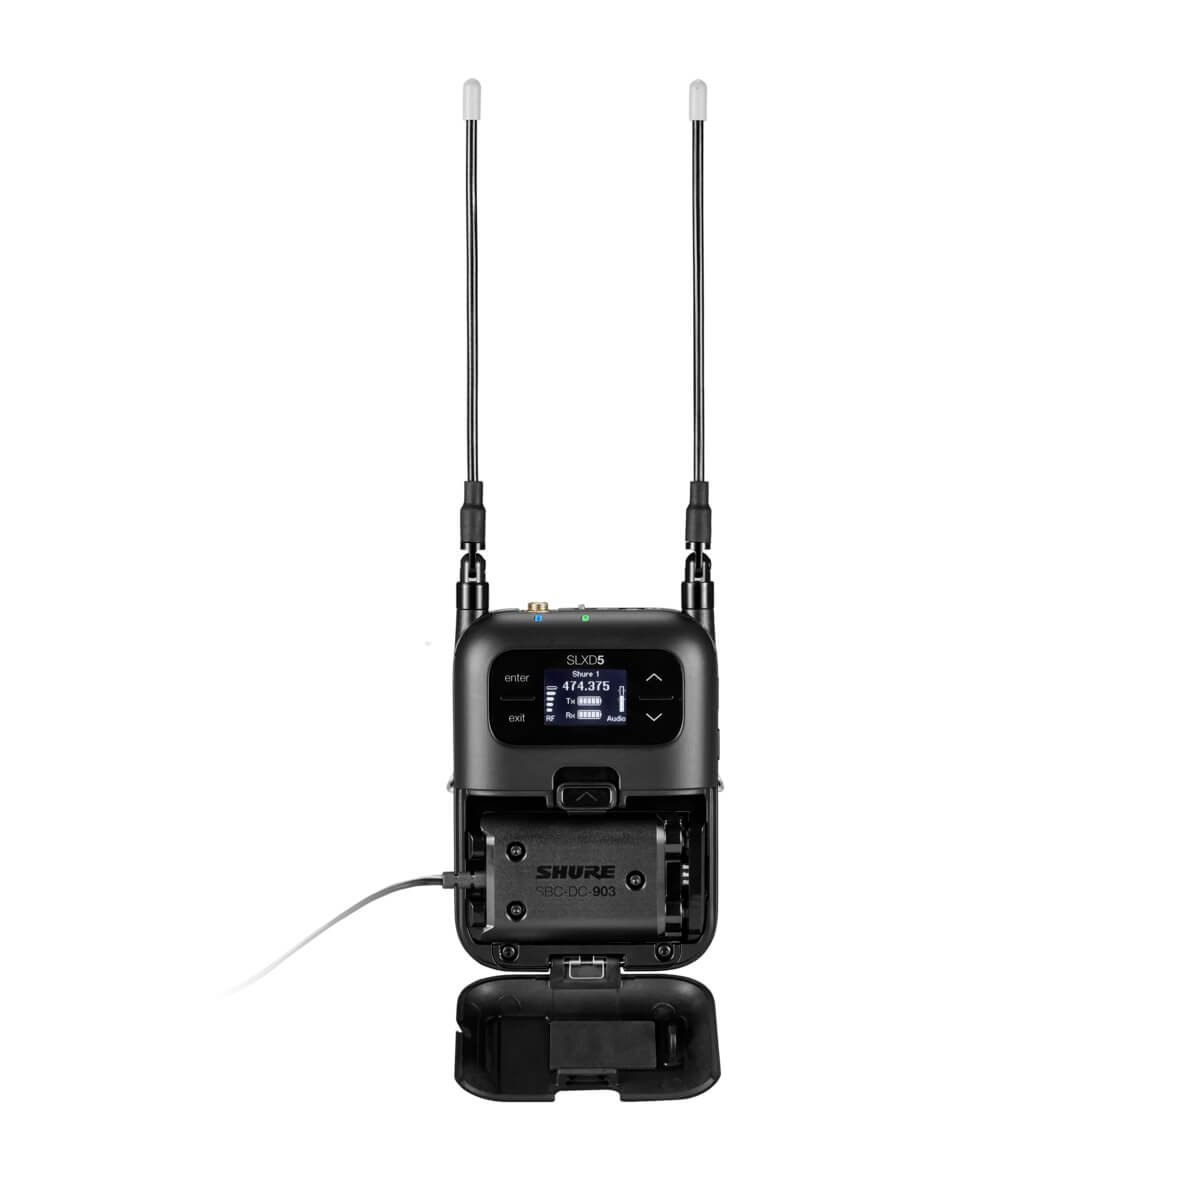 Shure SLXD5 - Single-Channel Portable Digital Wireless Receiver, shown with optional AC adapter